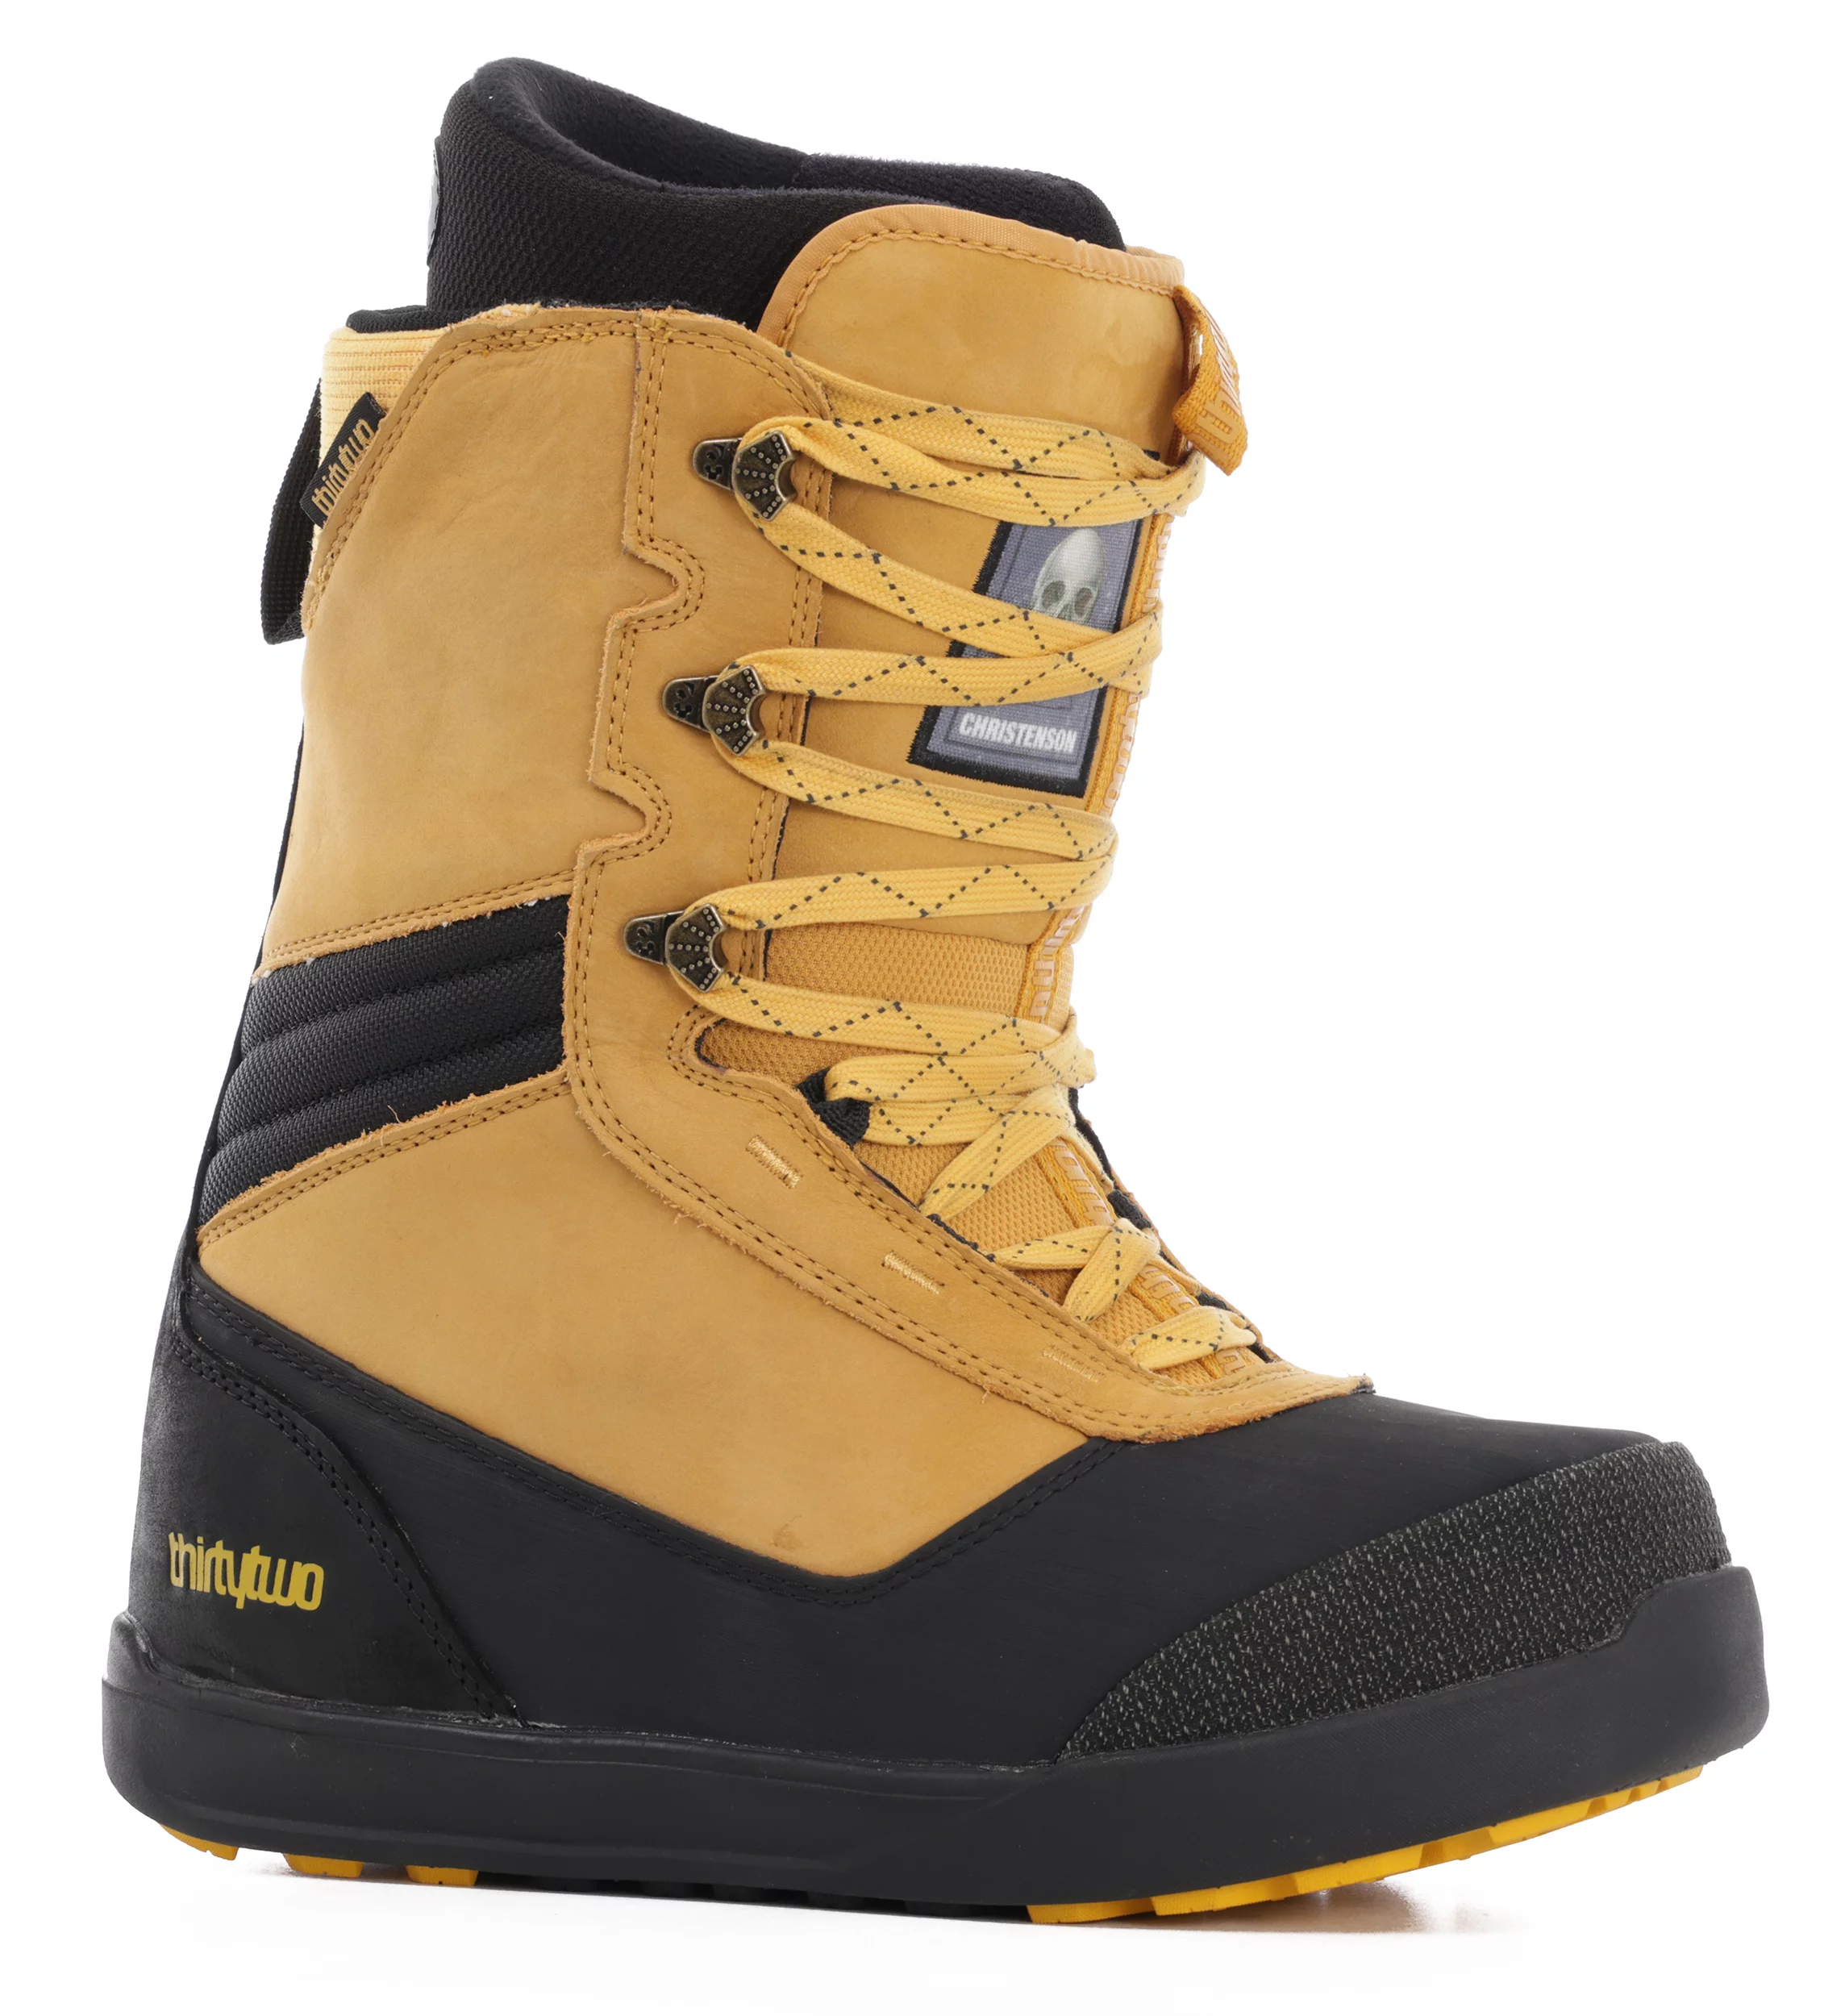 caravan Early to withdraw Thirtytwo Bandito x Christenson Surf Series Snowboard Boots 2023 - (chris  christenson) gold/black - Free Shipping | Tactics